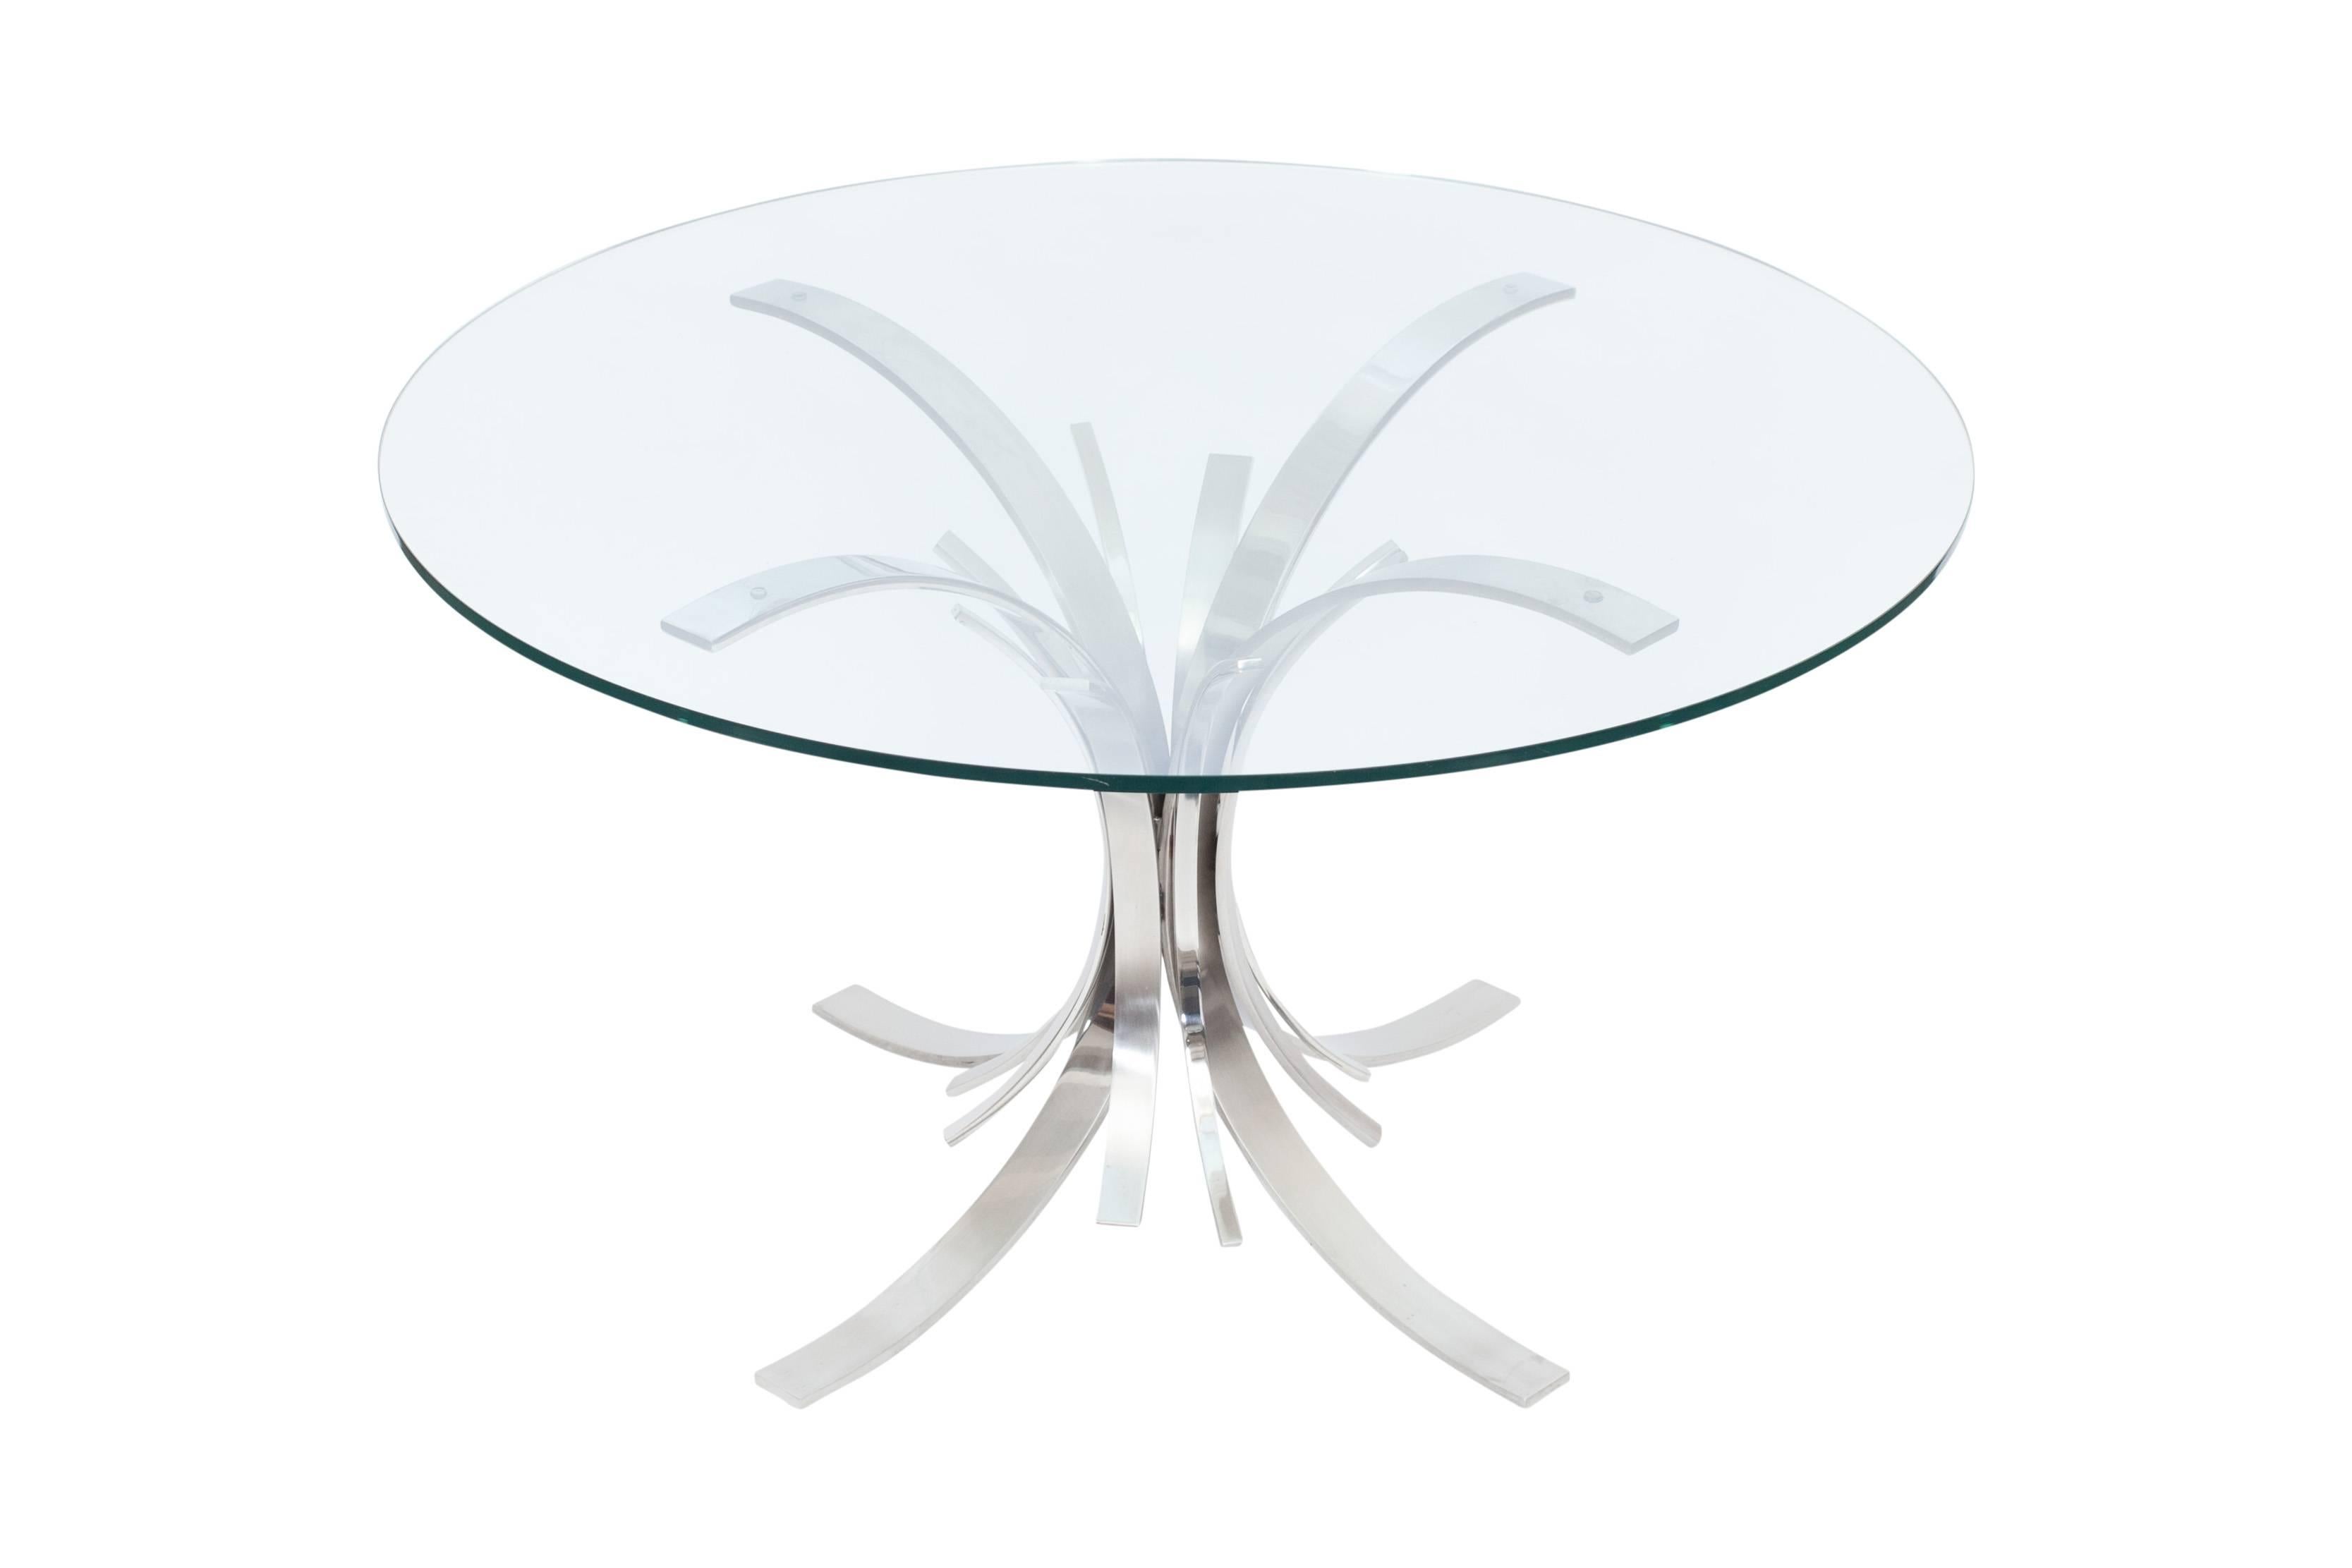 Stainless steel dining table with round glass top
by famous French female designer Maria Pergay.

Model 'Gerbe' 

France, 1975

Measures: Ø 130 cm, H 74 cm. 

Maria Pergay: Complete works 1957-2010.